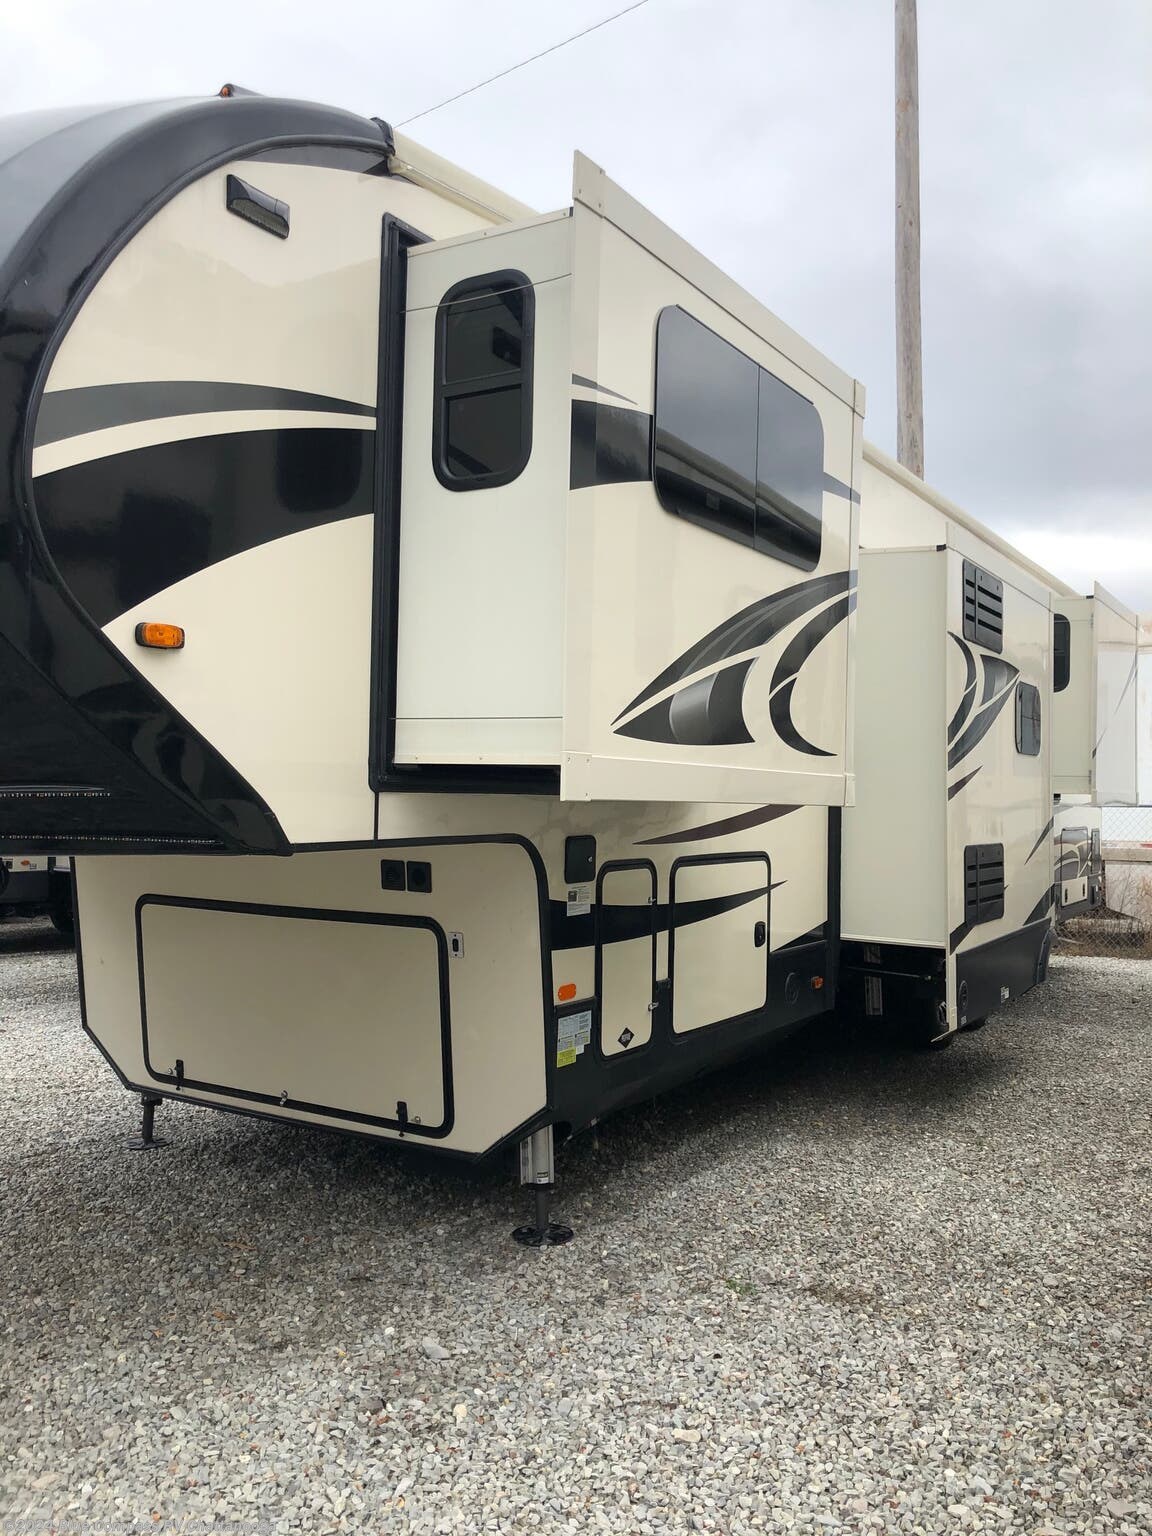 2020 Forest River RV Cardinal 3700FLX for Sale in Ringgold, GA 30736 2020 Forest River Cardinal Luxury Fifth Wheel 3700flx